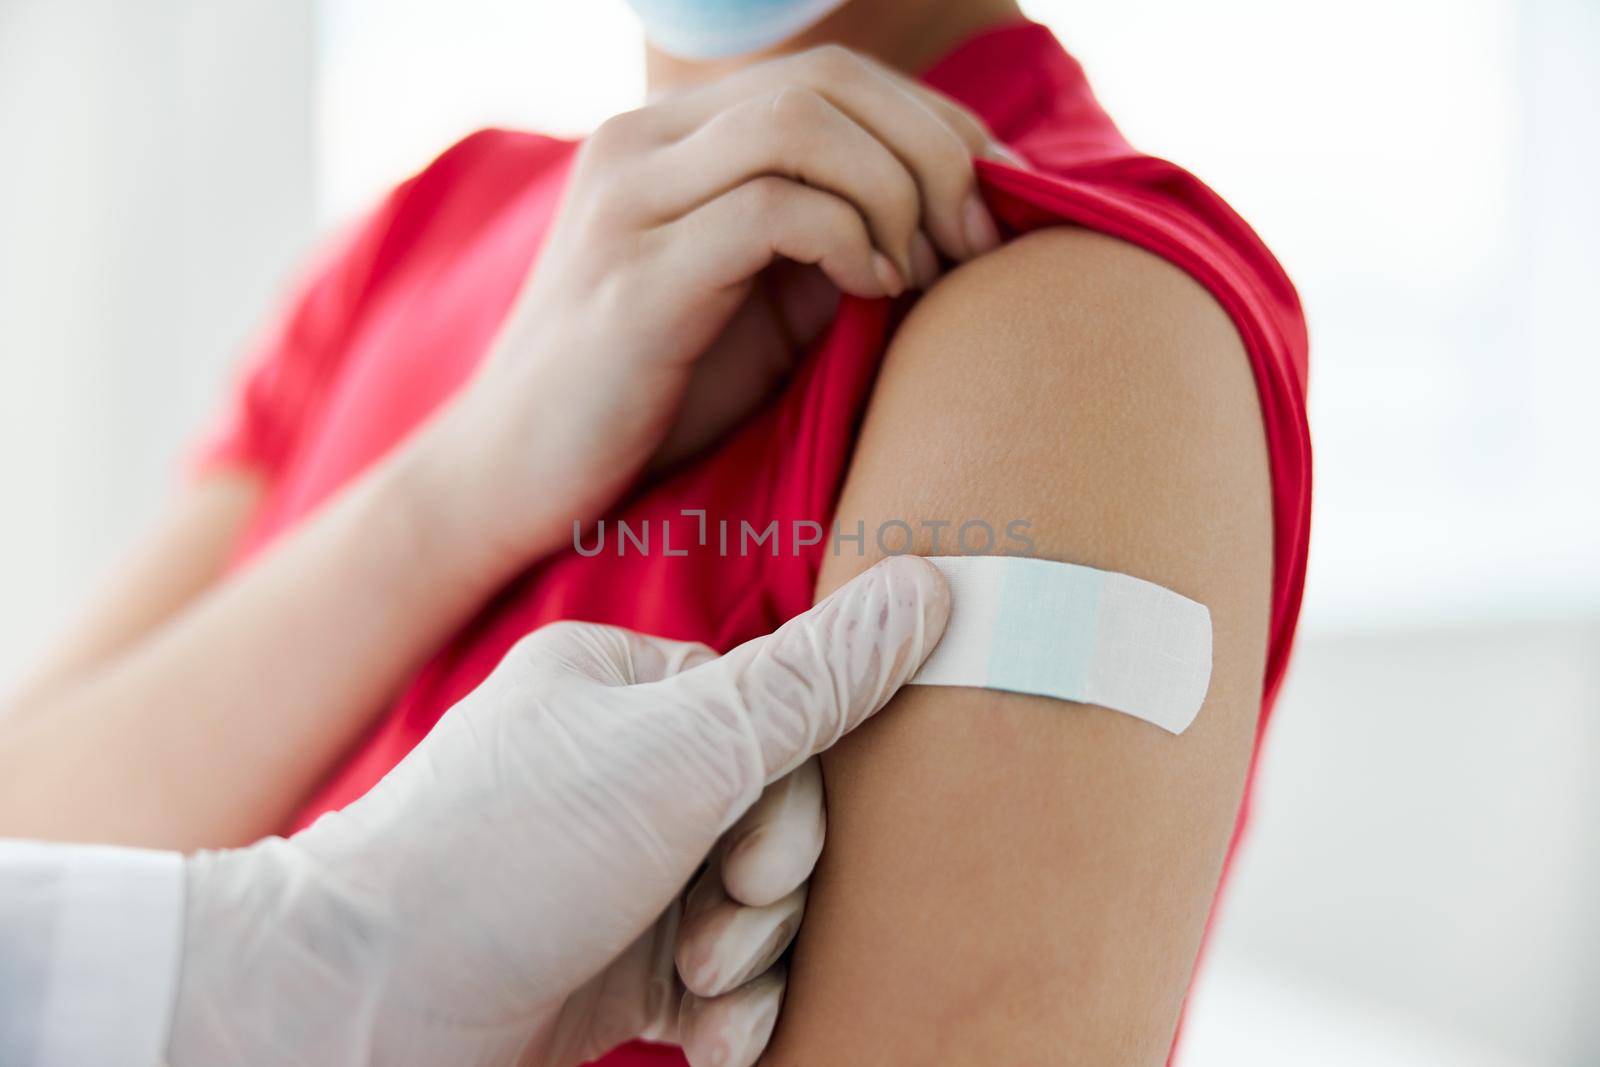 the doctor seals the hand with adhesive tape after the injection of health by SHOTPRIME